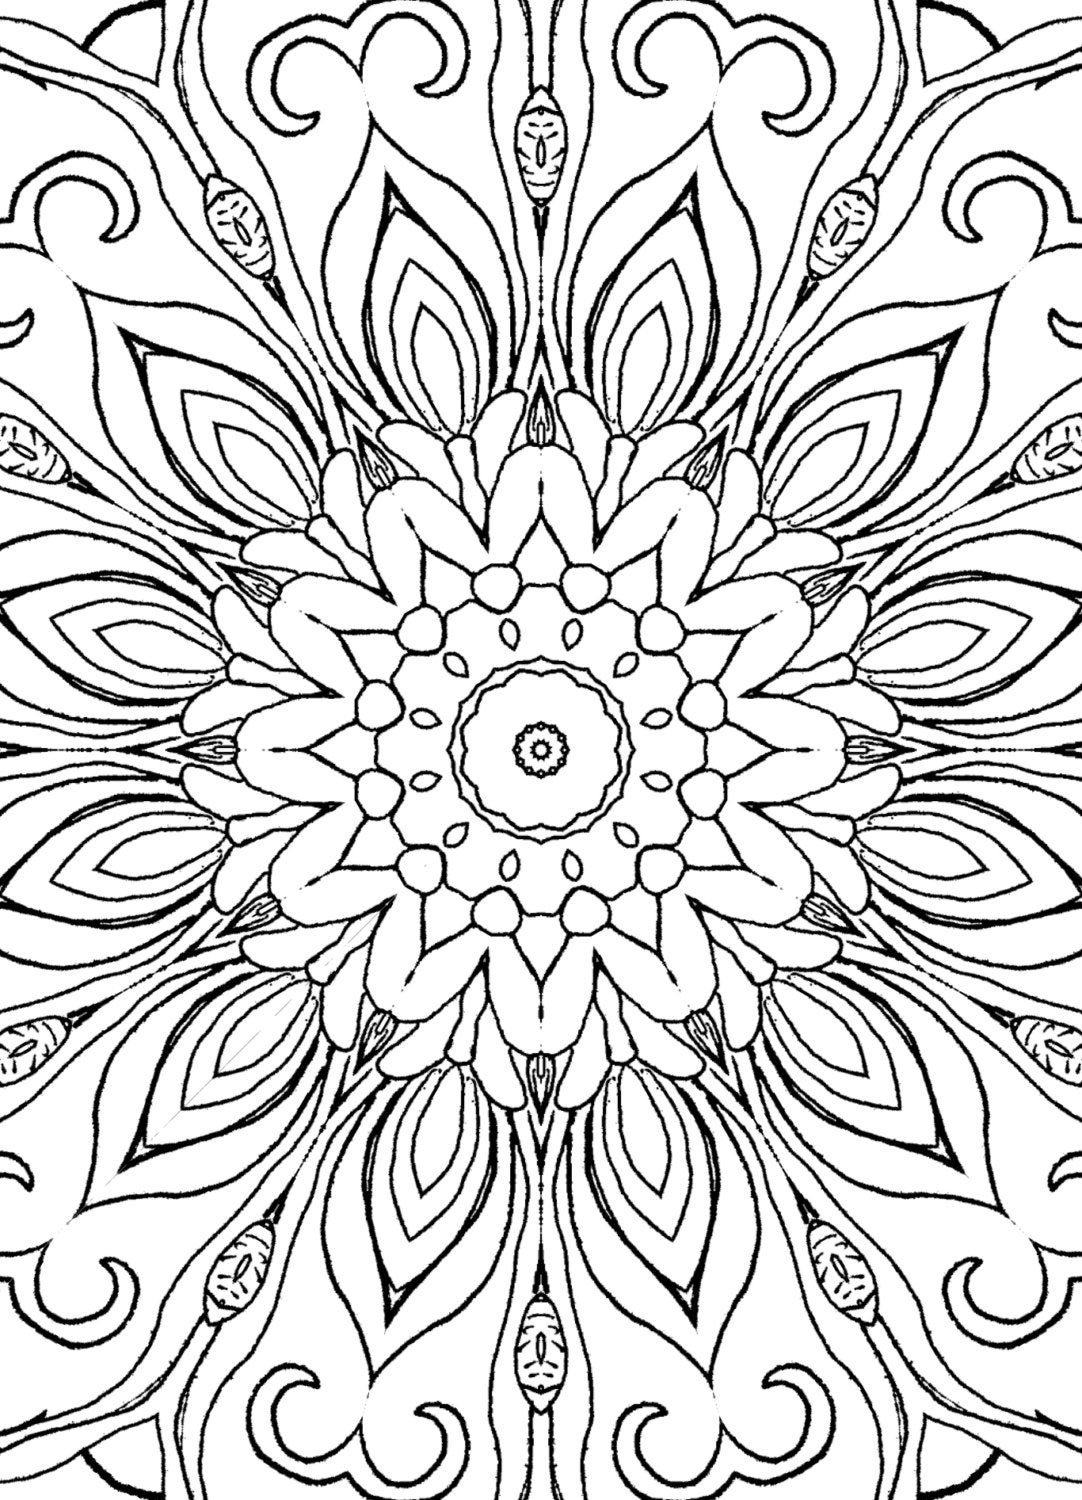 Adult Coloring Book
 25 Coloring Pages including Mandalas Geometric Designs Rug